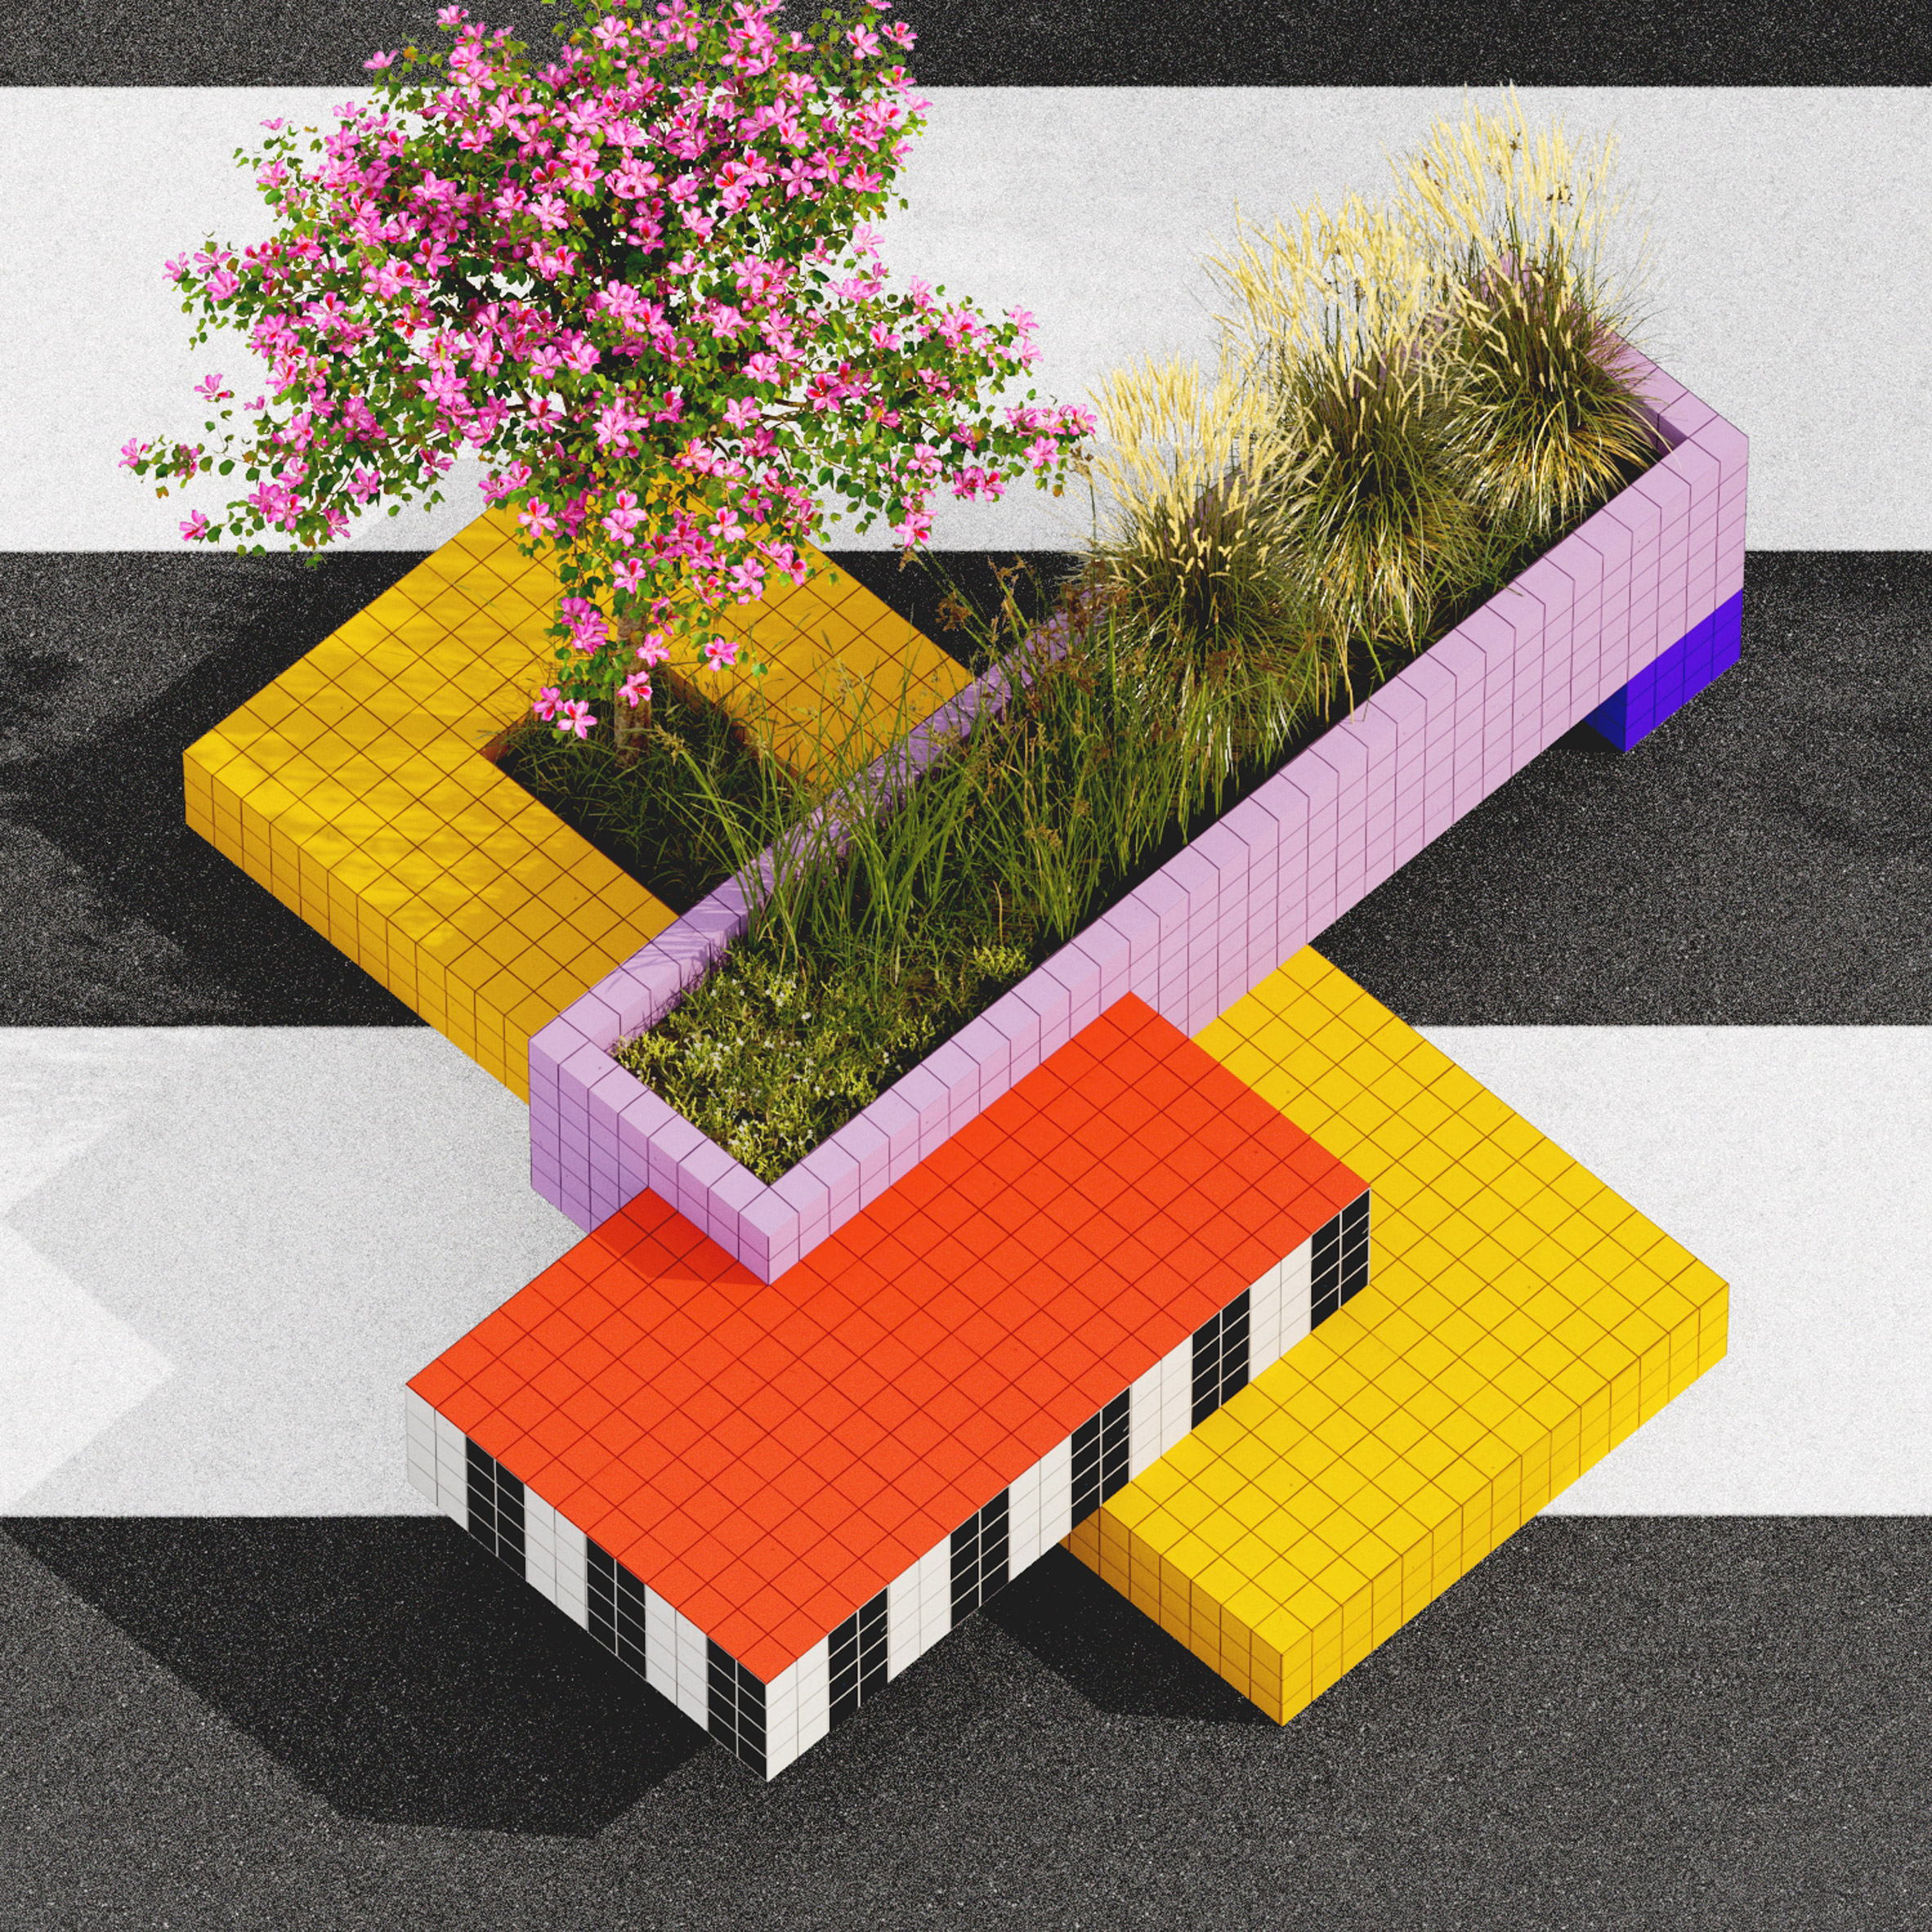 A geometric planter in Camille Walala's proposal of a pedestrianised Oxford Street, London